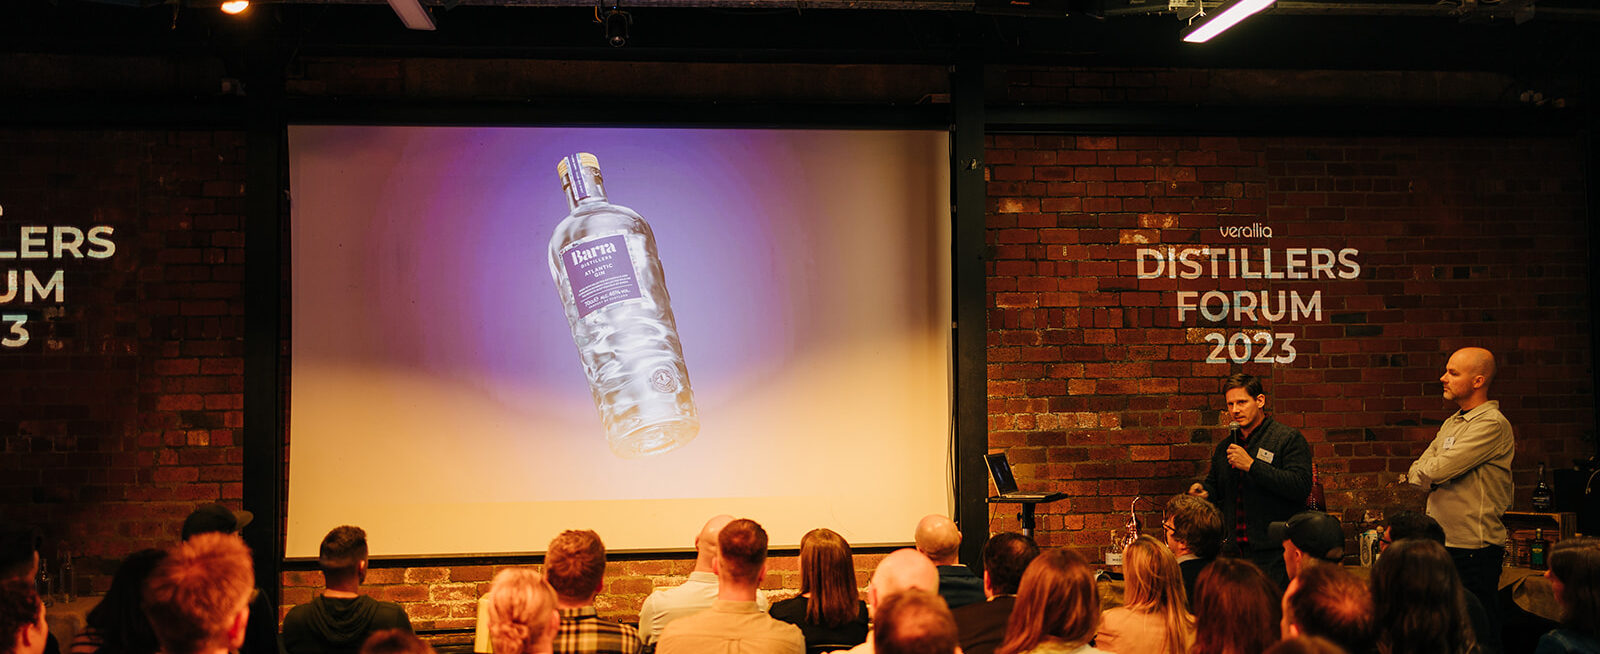 Picture of the Verallia Distillers Forum 2023 with the Isle of Barra bottle on the screen